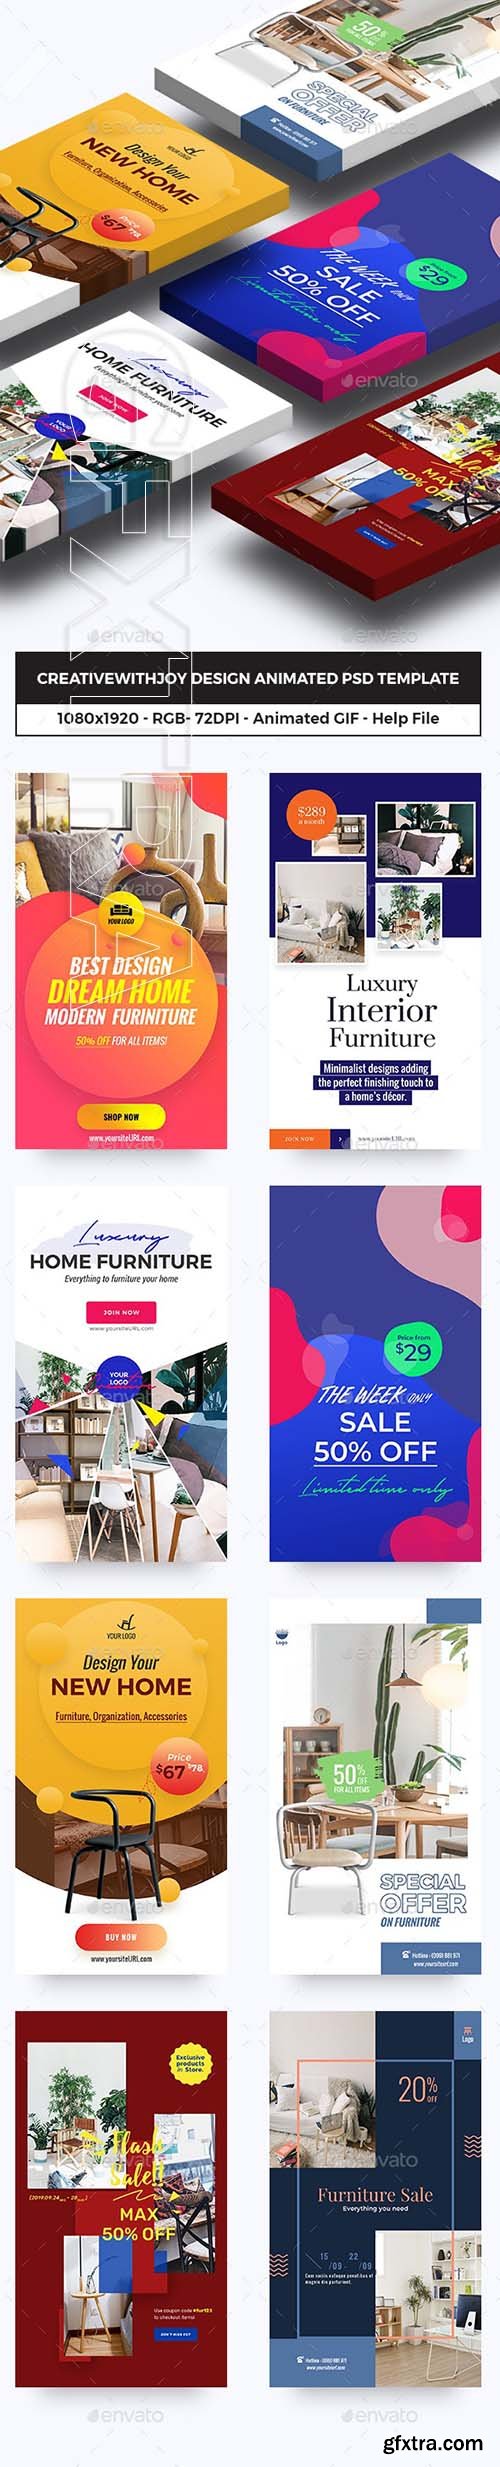 GraphicRiver - Furniture, Decor Animated GIFs Instagram Stories 23834805